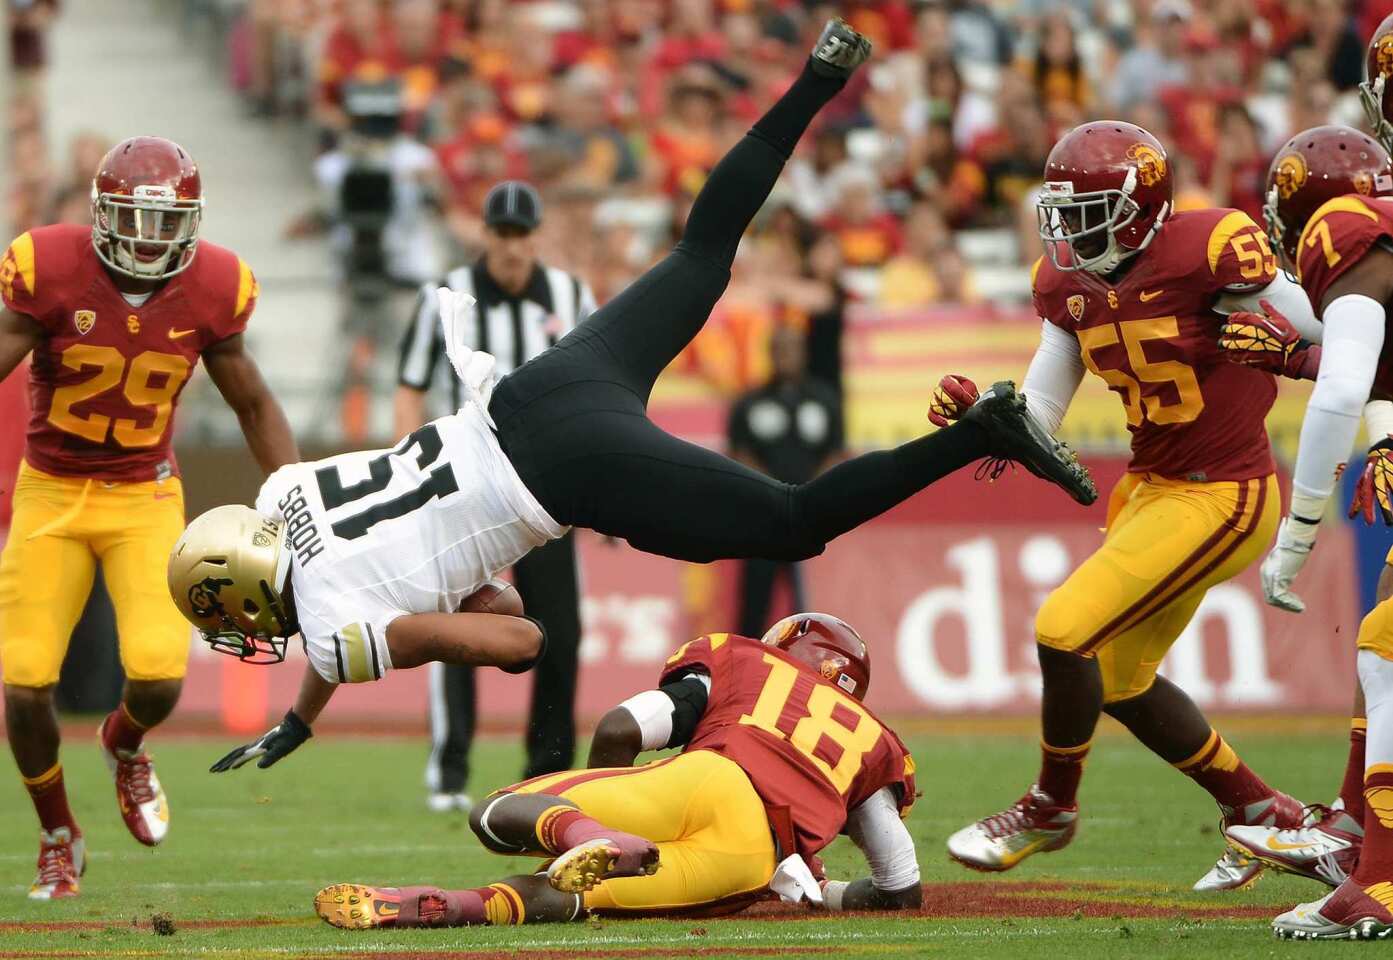 Colorado tight end Vincent Hobbs is upended by USC linebacker Dion Bailey after a reception in the first quarter Saturday.